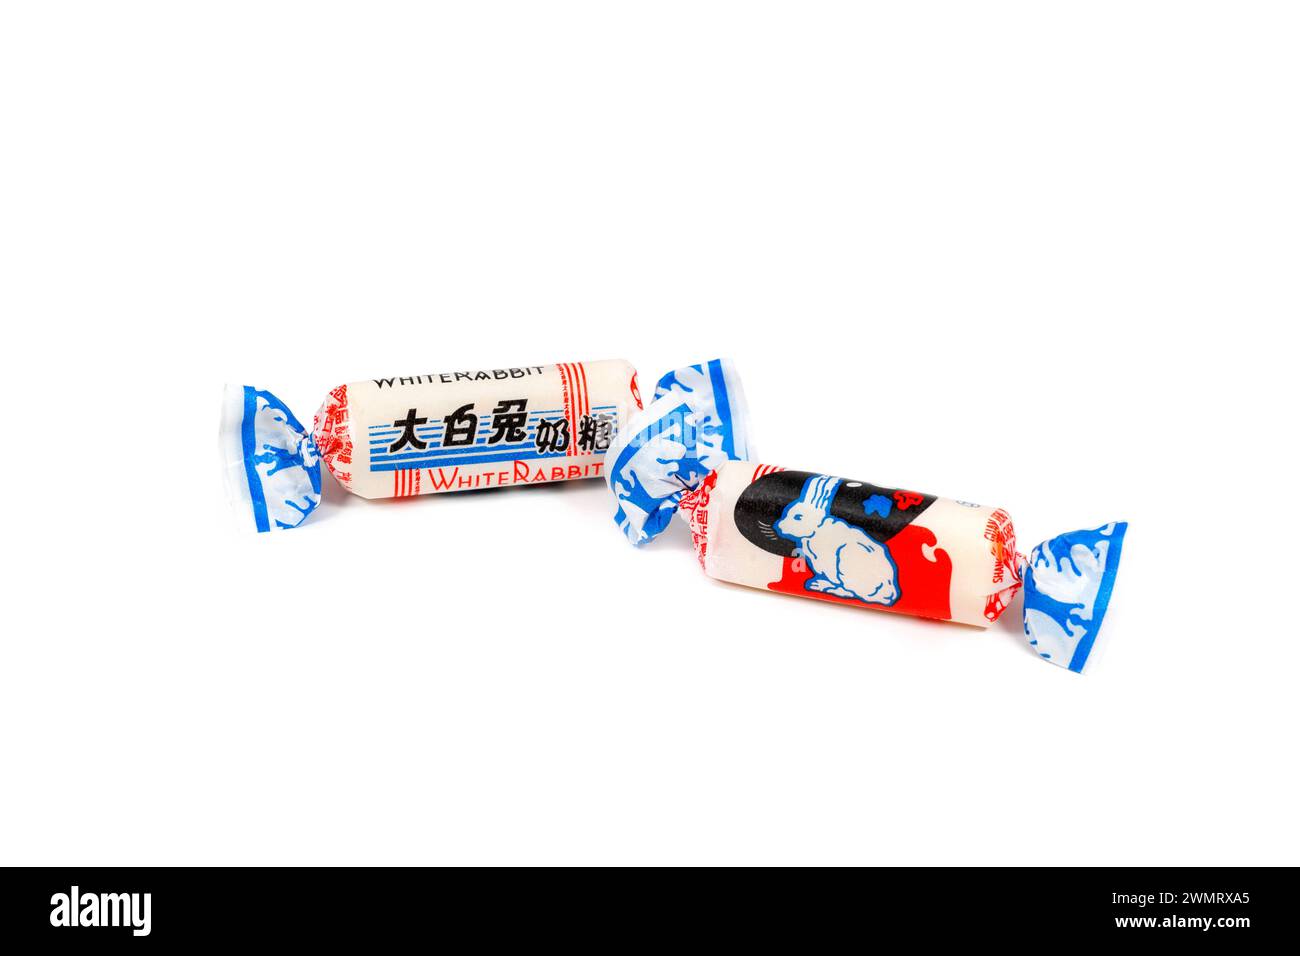 White Rabbit Candy 大白兔奶糖 Chinese milk candy confection isolated on a white background.  cutout image for illustration and editorial use. Stock Photo